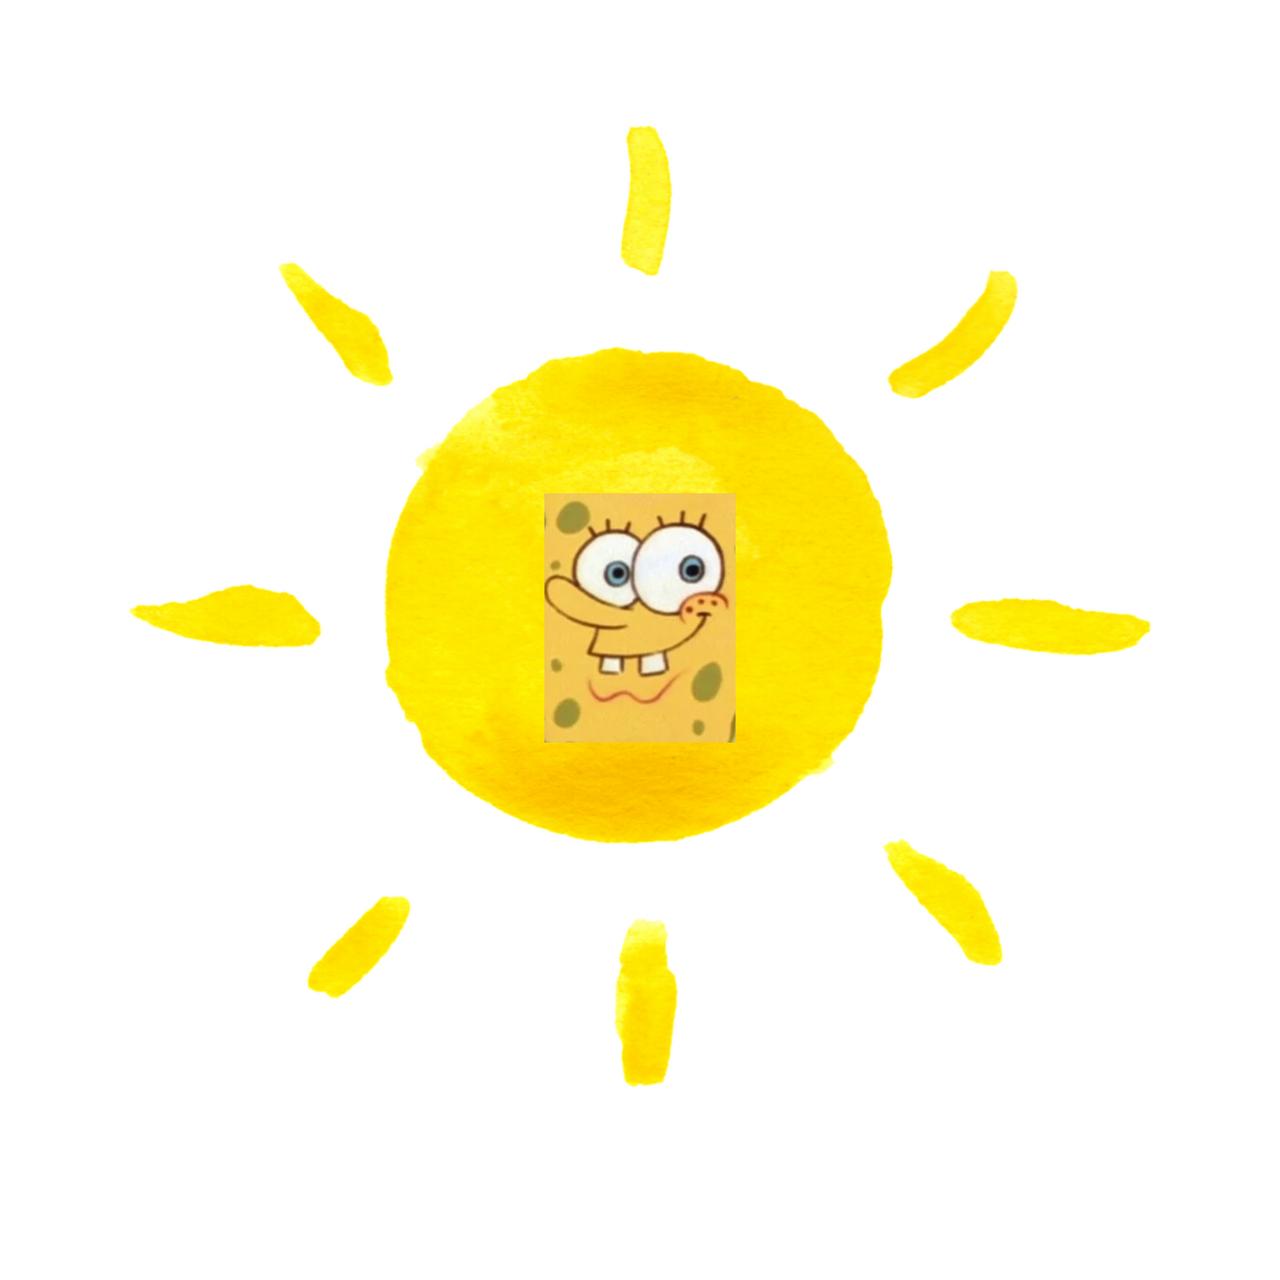 the-homemade-teletubbies-sun-by-123riley123-on-deviantart